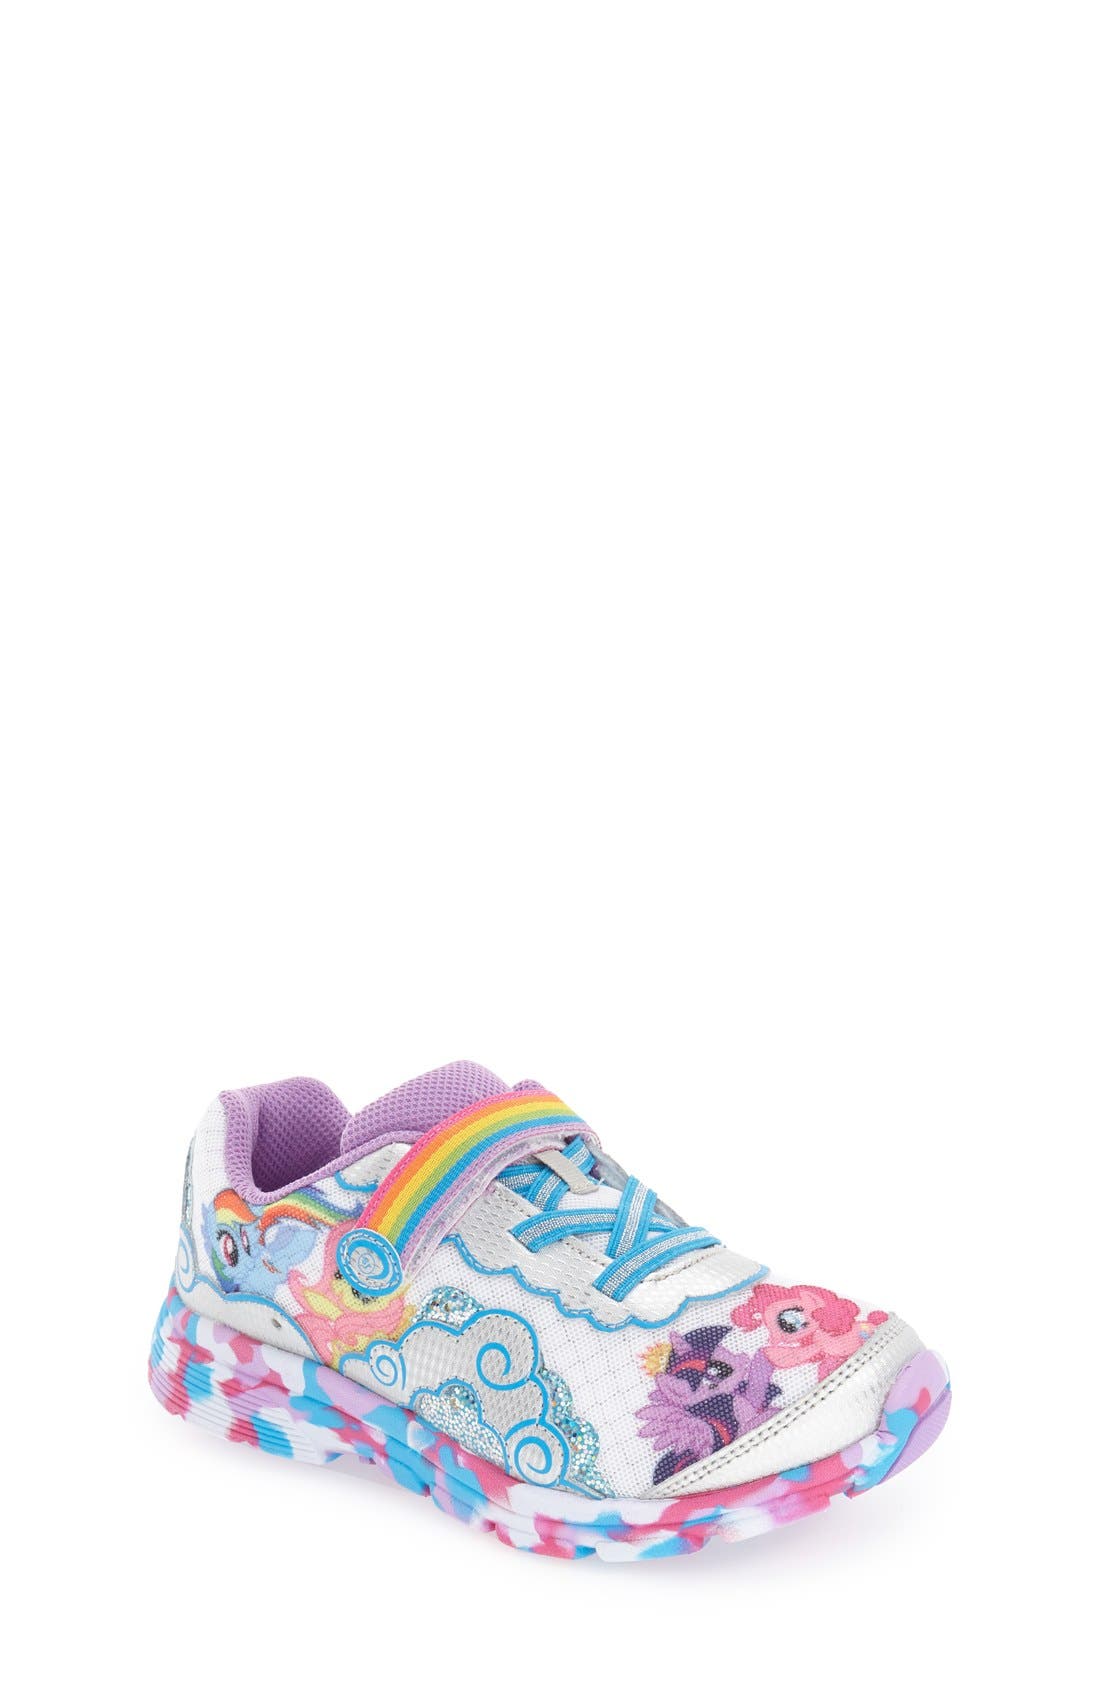 light up my little pony shoes